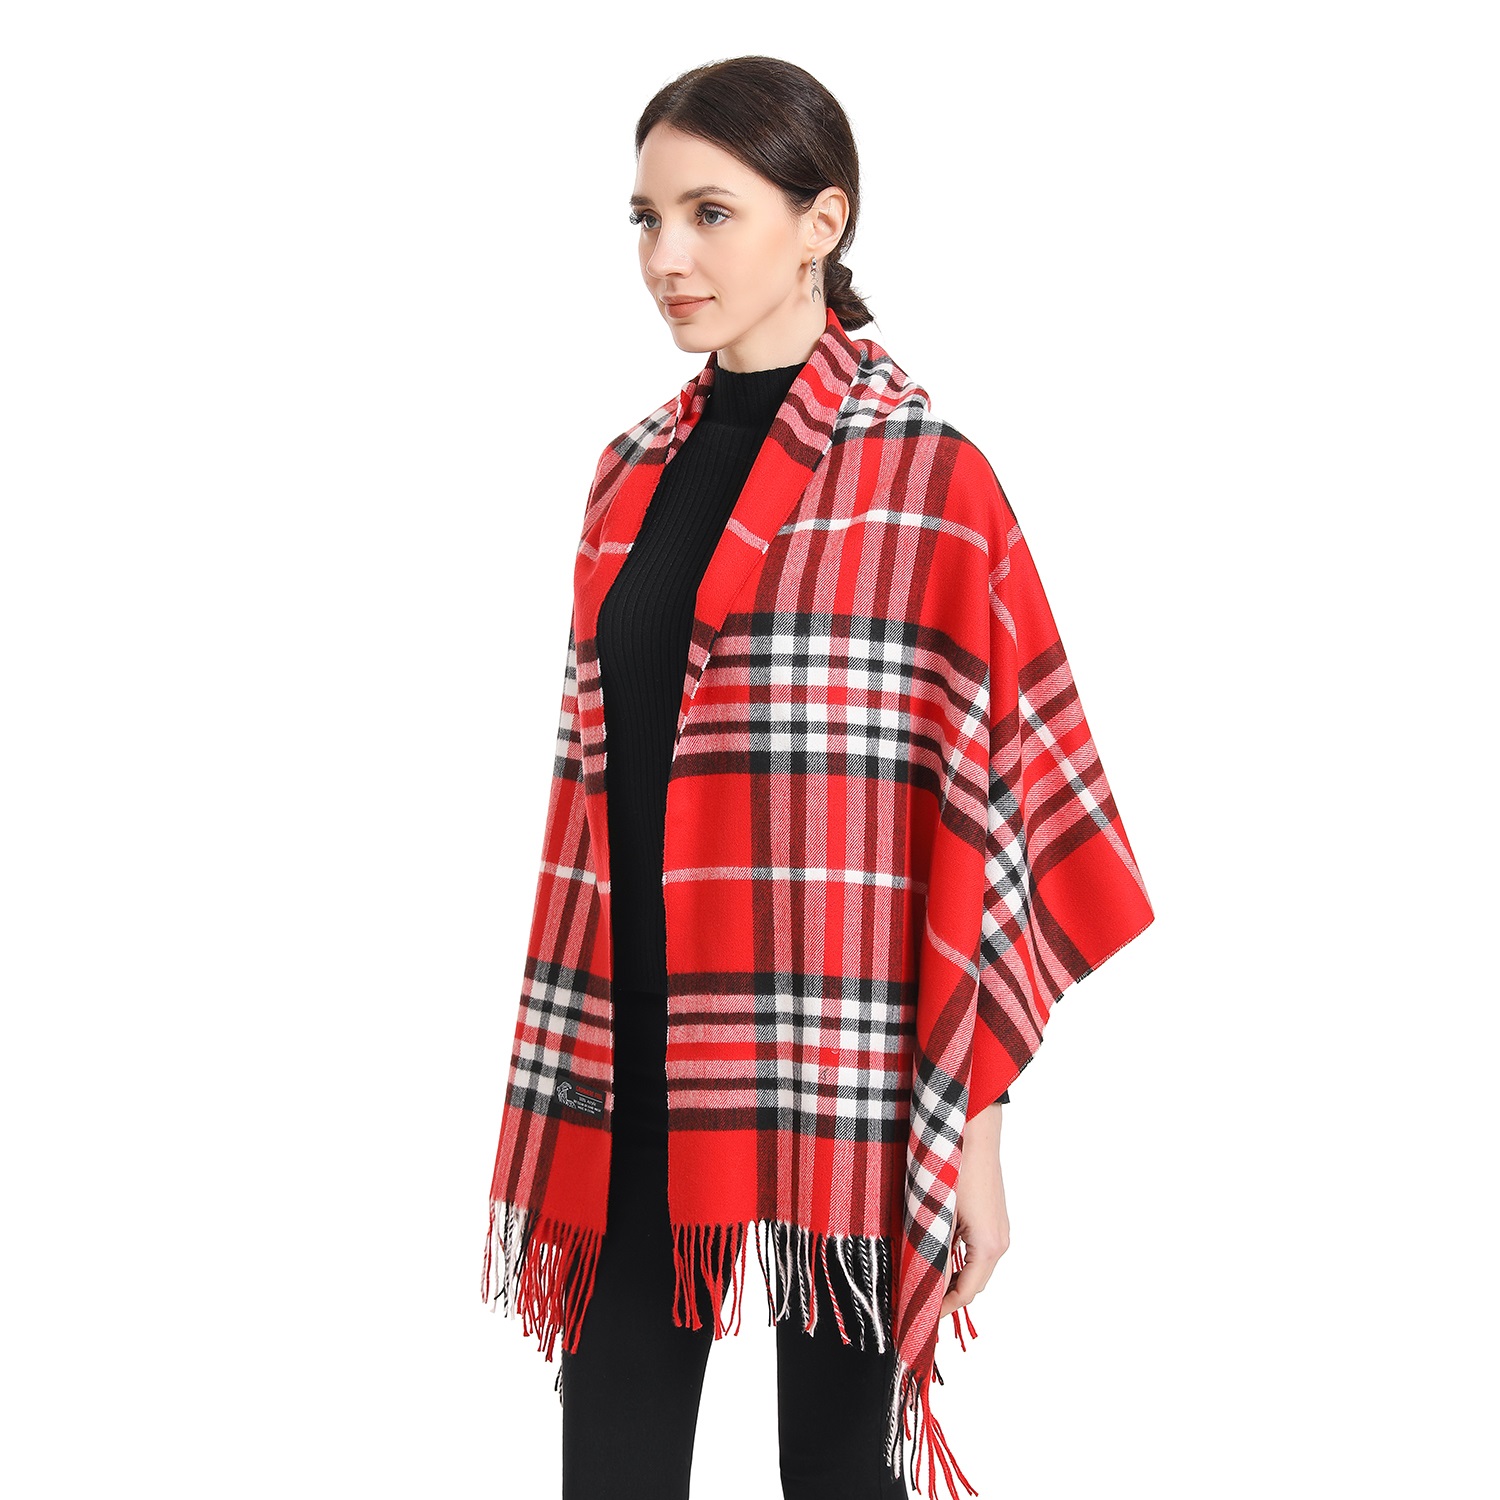 Giant Check Shawl AZ07-1 Color: Red